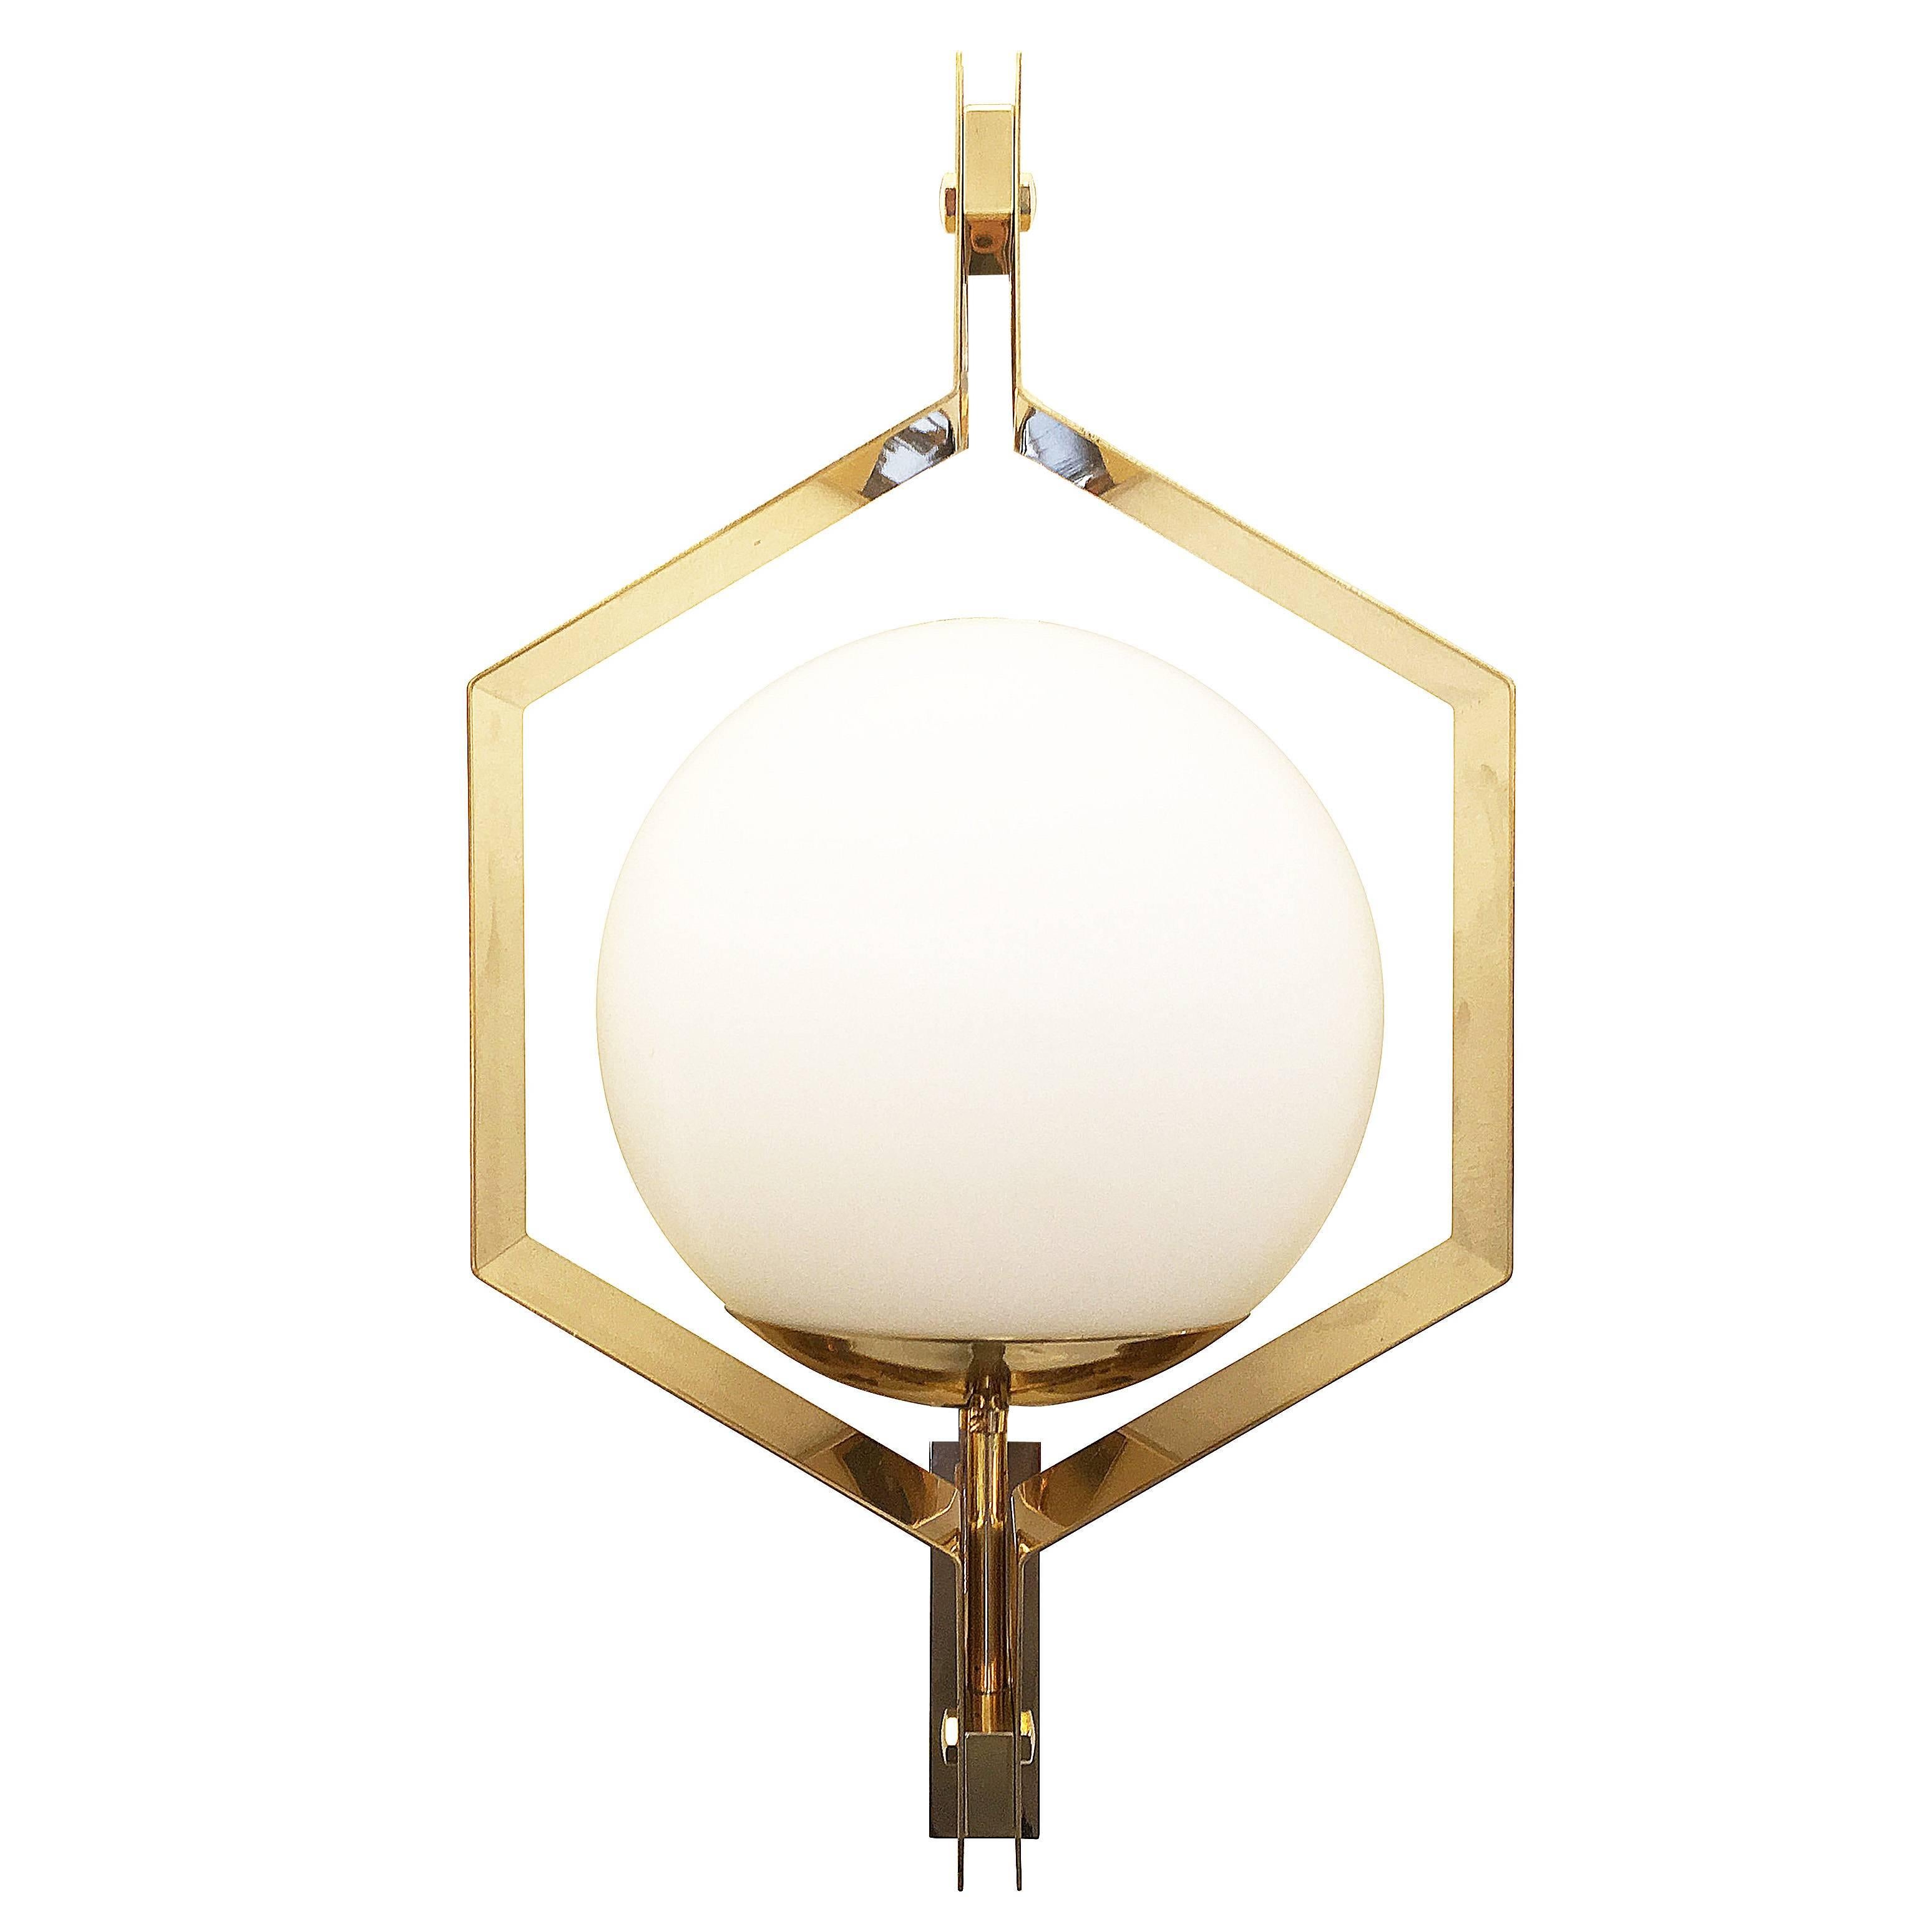 Esagono wall light designed in collaboration with Italian artist Fedele Papagni for our contemporary line, formA by Gaspare Asaro. Features a frosted glass sphere encased by a hexagonal brass frame. Available to order in the finish of your choice.